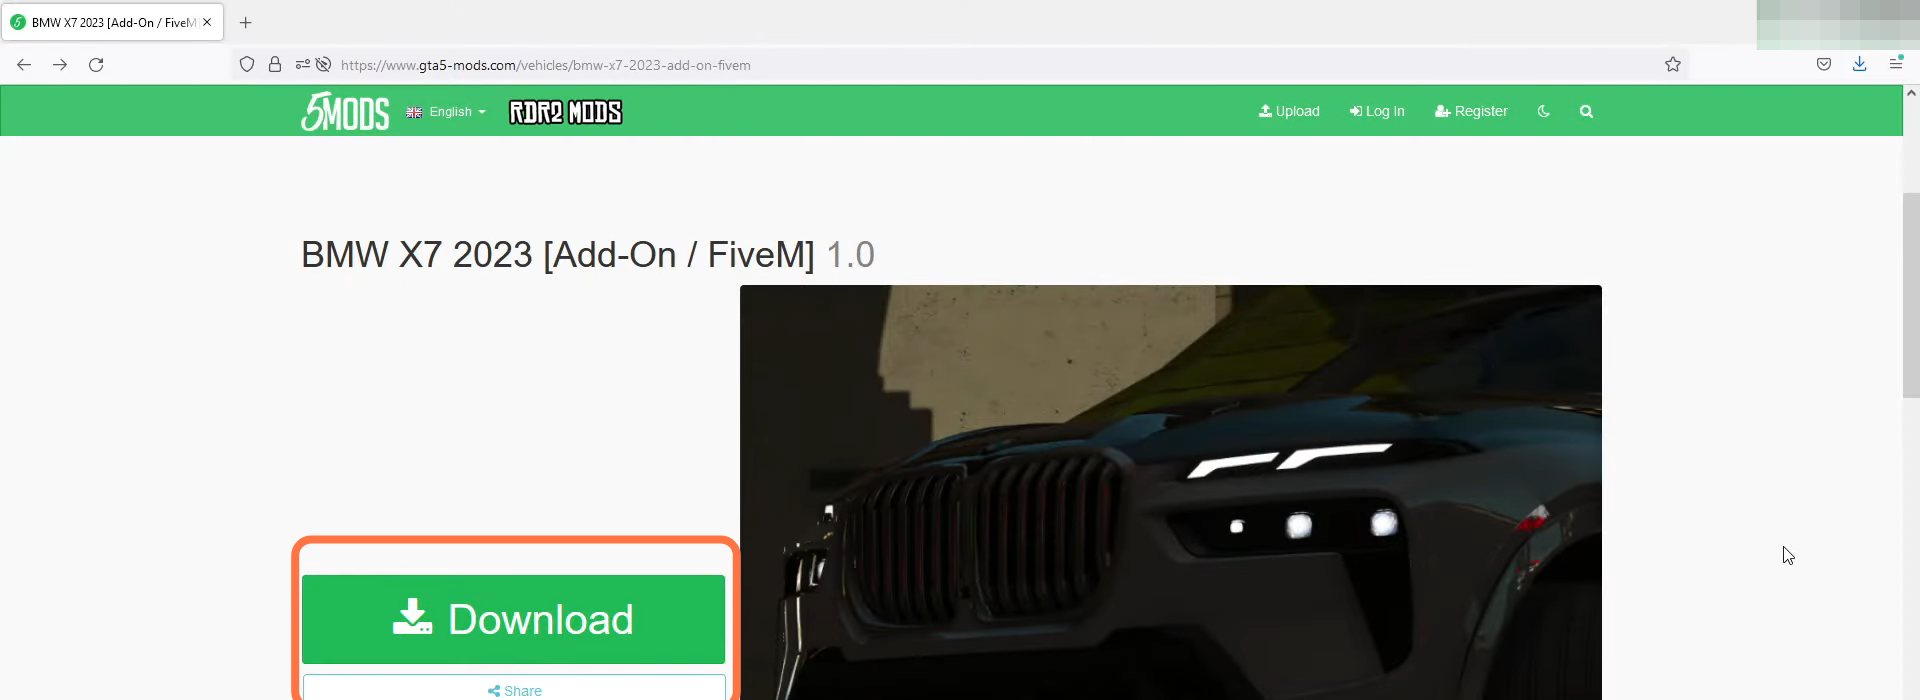 First, you will need to download the mod file from "https://www.gta5-mods.com/vehicles/bm...". Open up the link and tap on the Download button to download the file. 